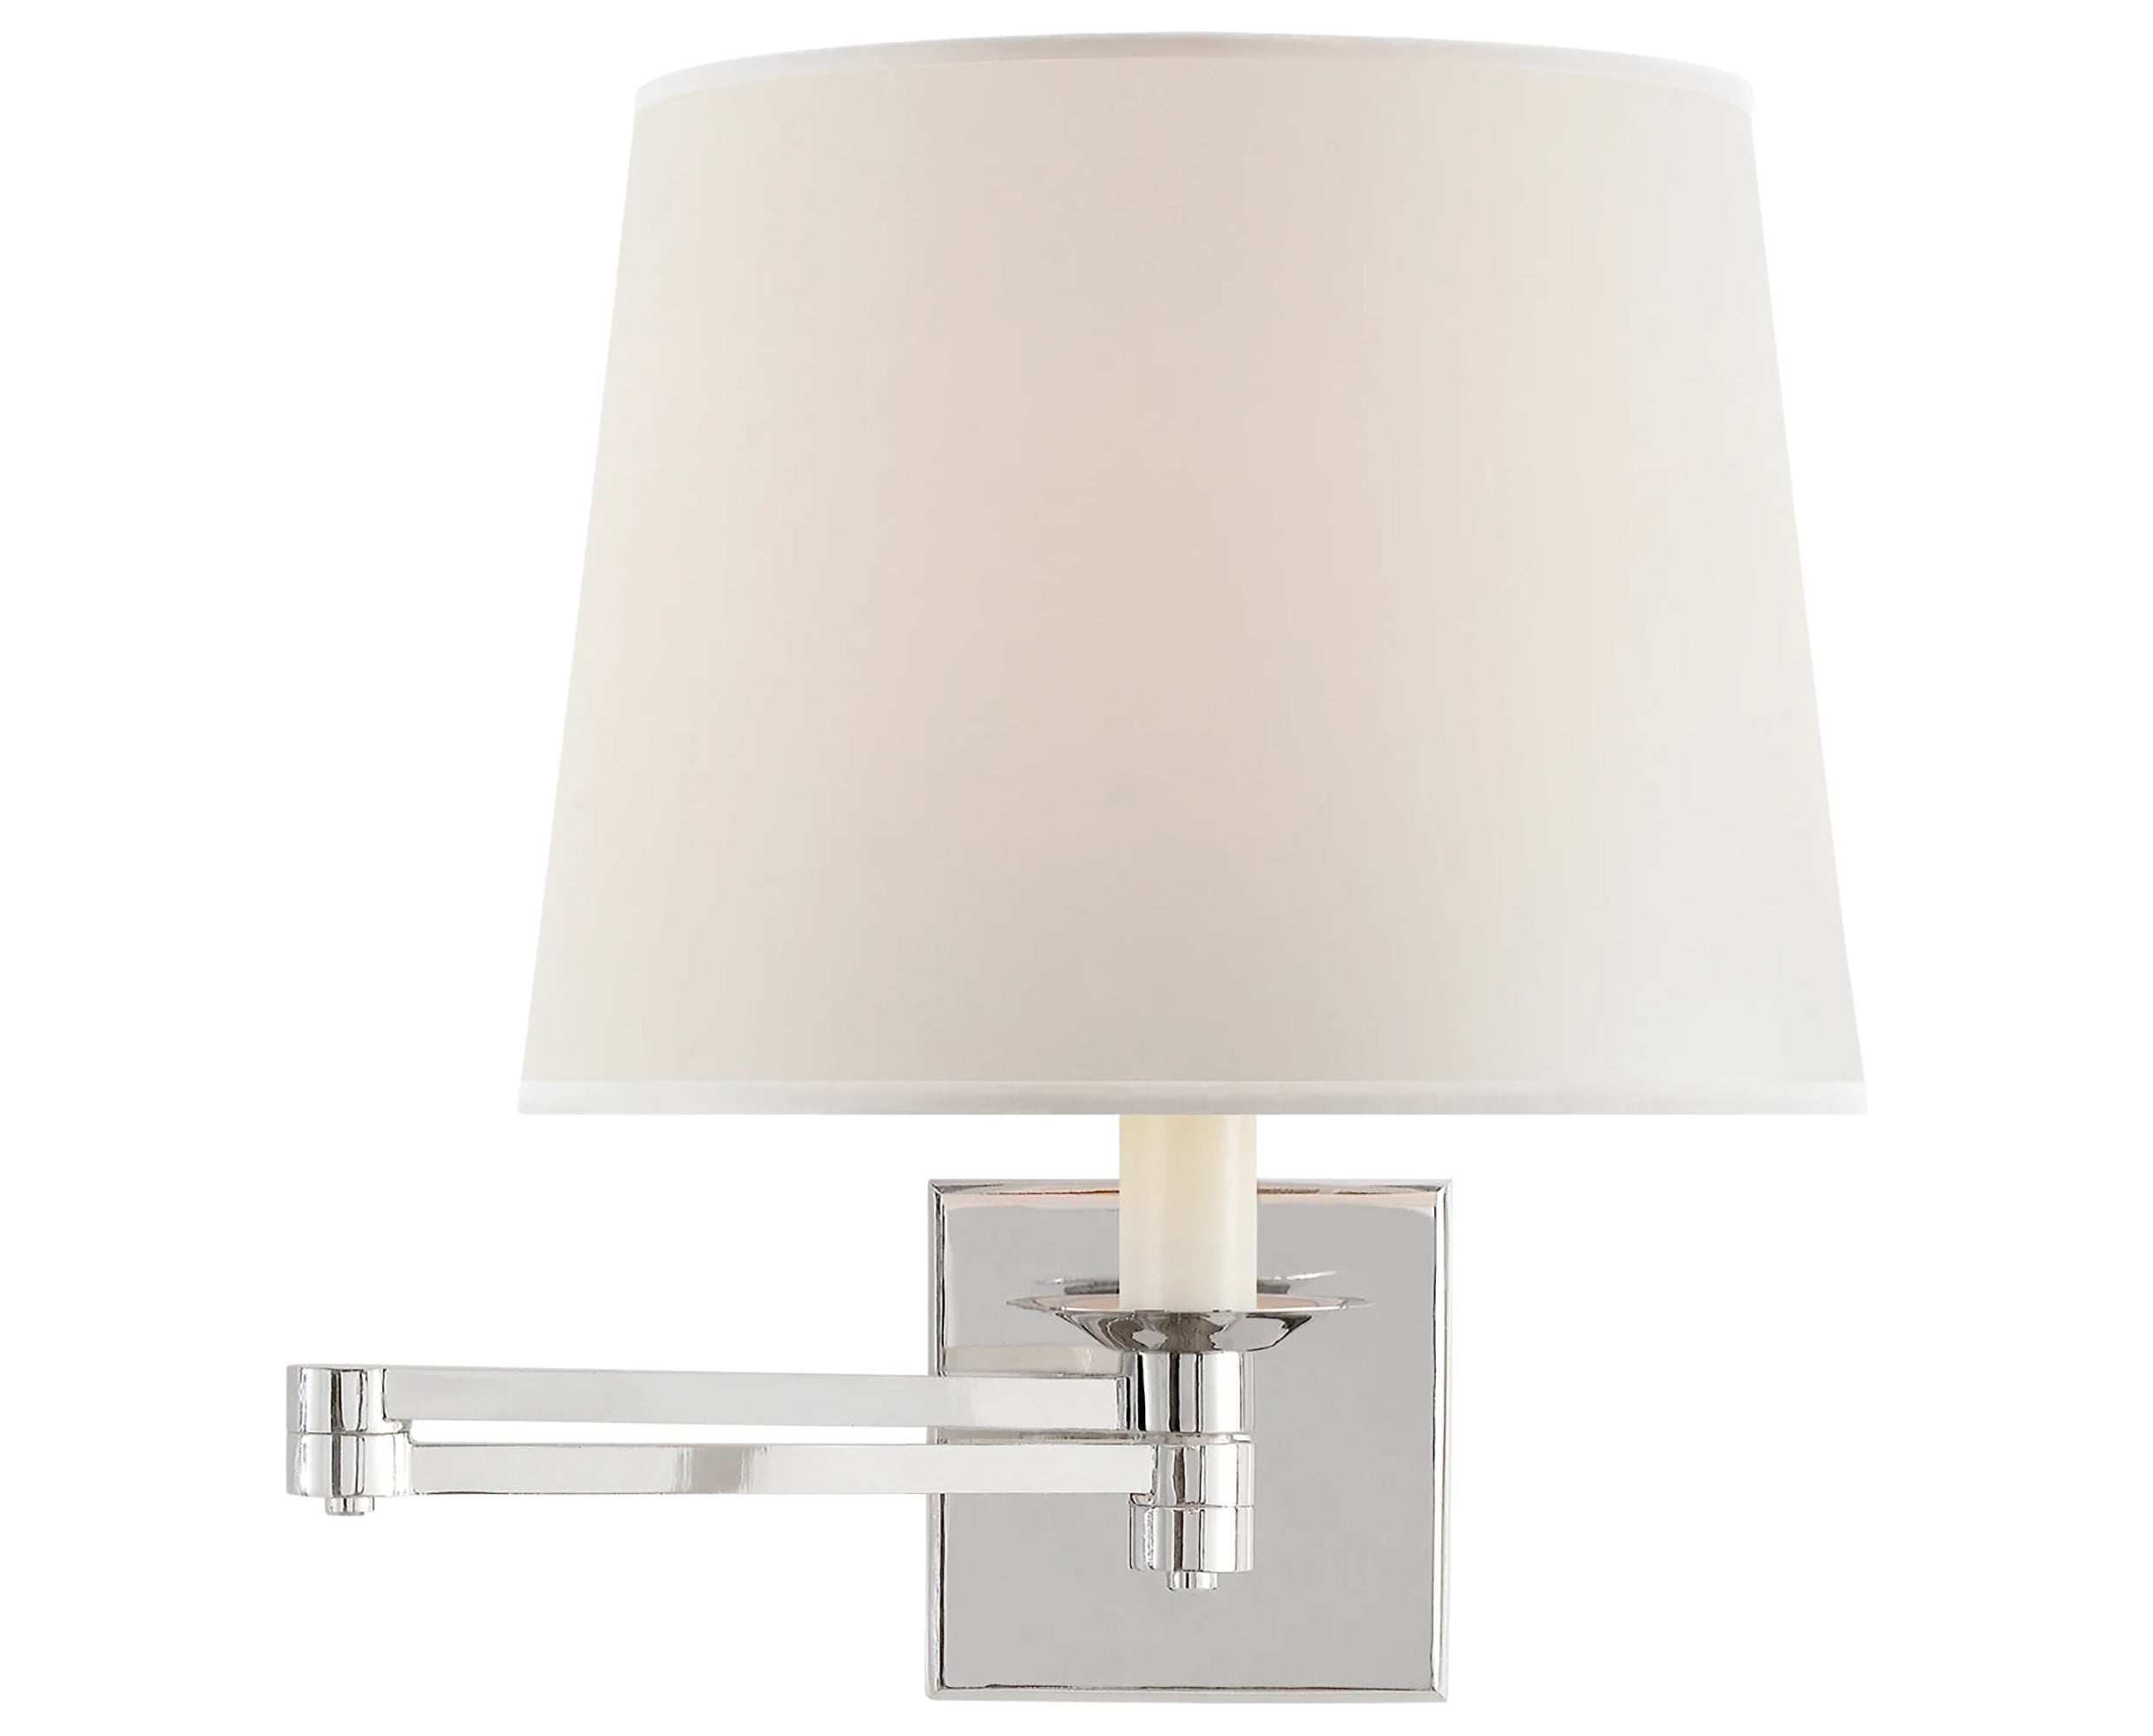 Polished Nickel &amp; Percale Nordy | Evans Swing Arm Sconce | Valley Ridge Furniture